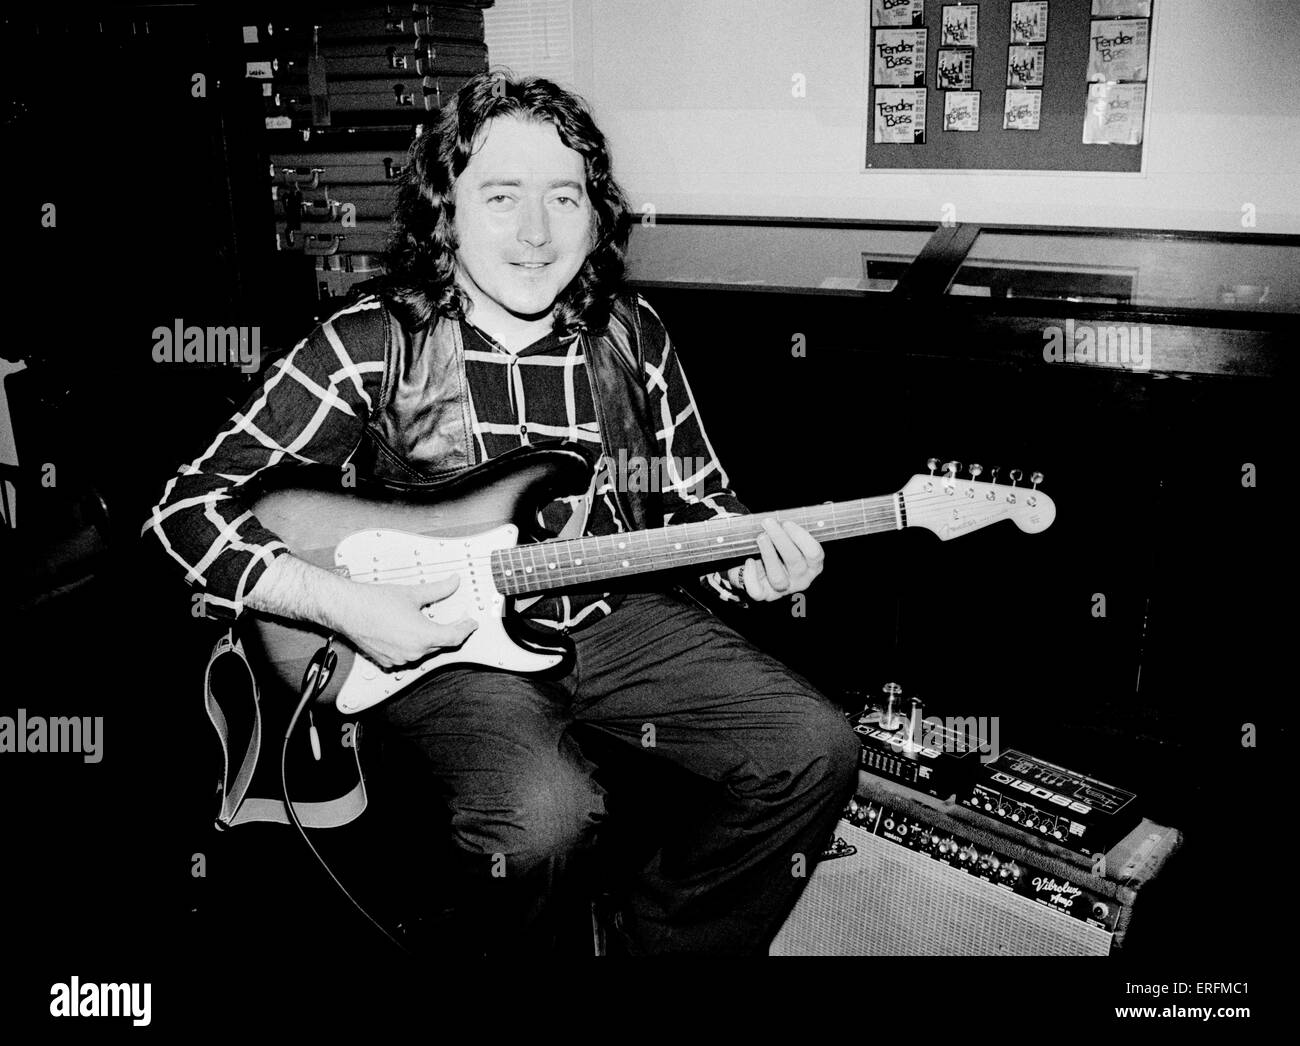 Rory Gallagher - portrait of the Irish blues / rock guitarist, taken in June 1989 at the Roland UK premises in Brenford, to Stock Photo